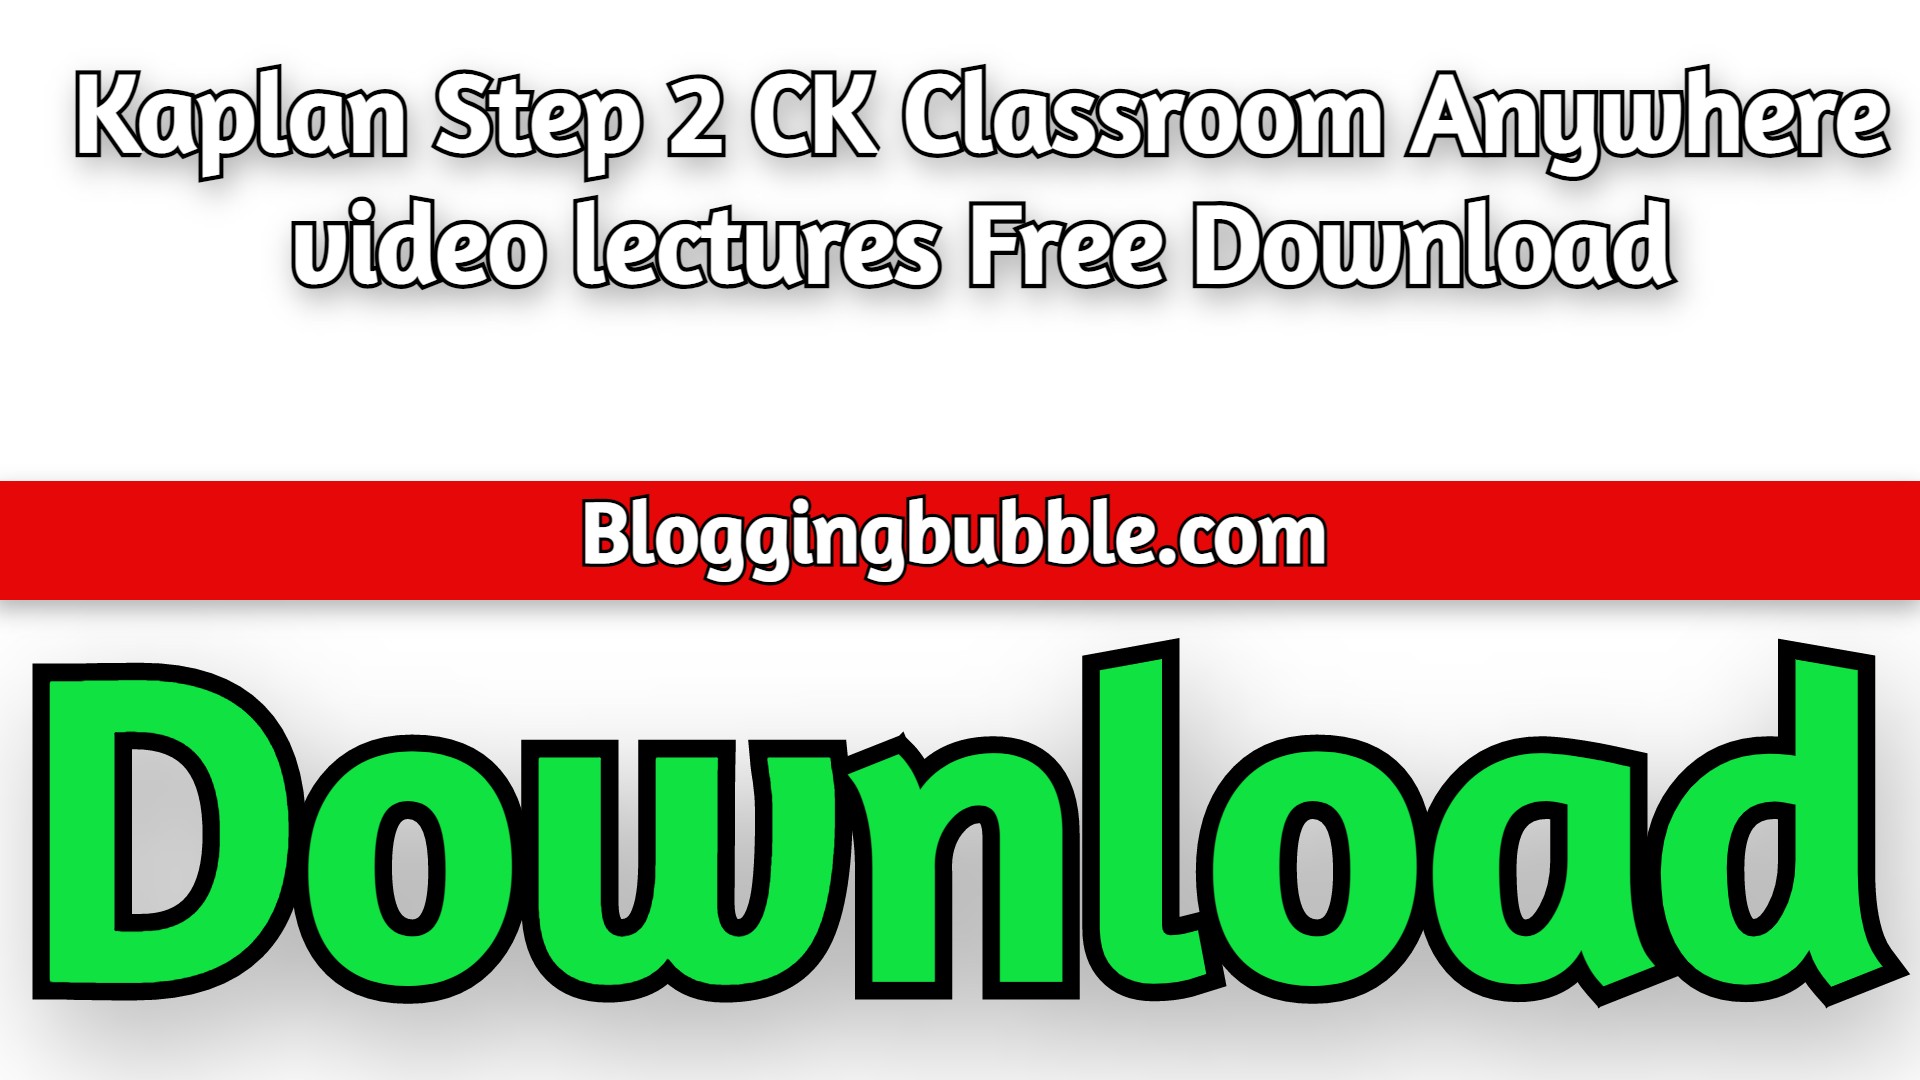 Kaplan Step 2 CK Classroom Anywhere 2014 video lectures Free Download